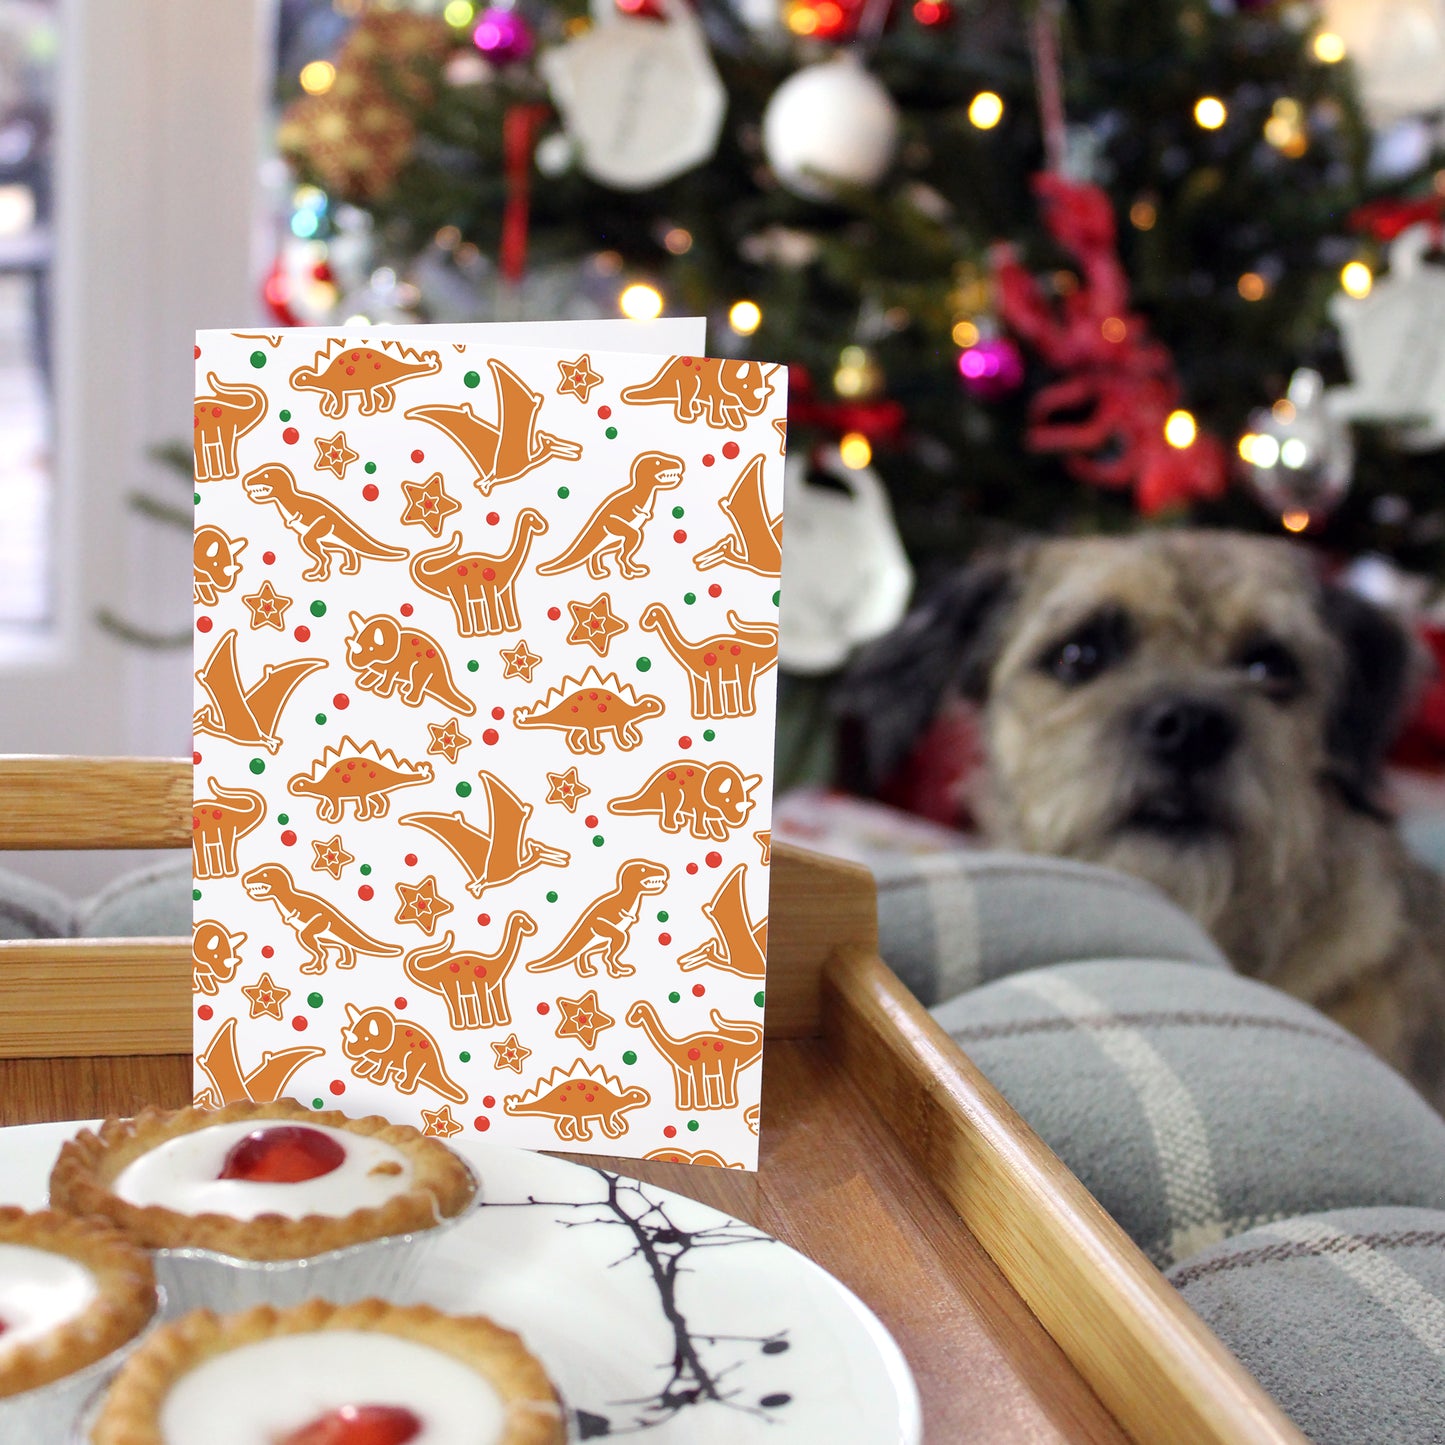 dinosaur gingerbread Christmas card on a tray with a plate of bakewell tarts. in the background is a blurred out Christmas tree and a border terrier dog 